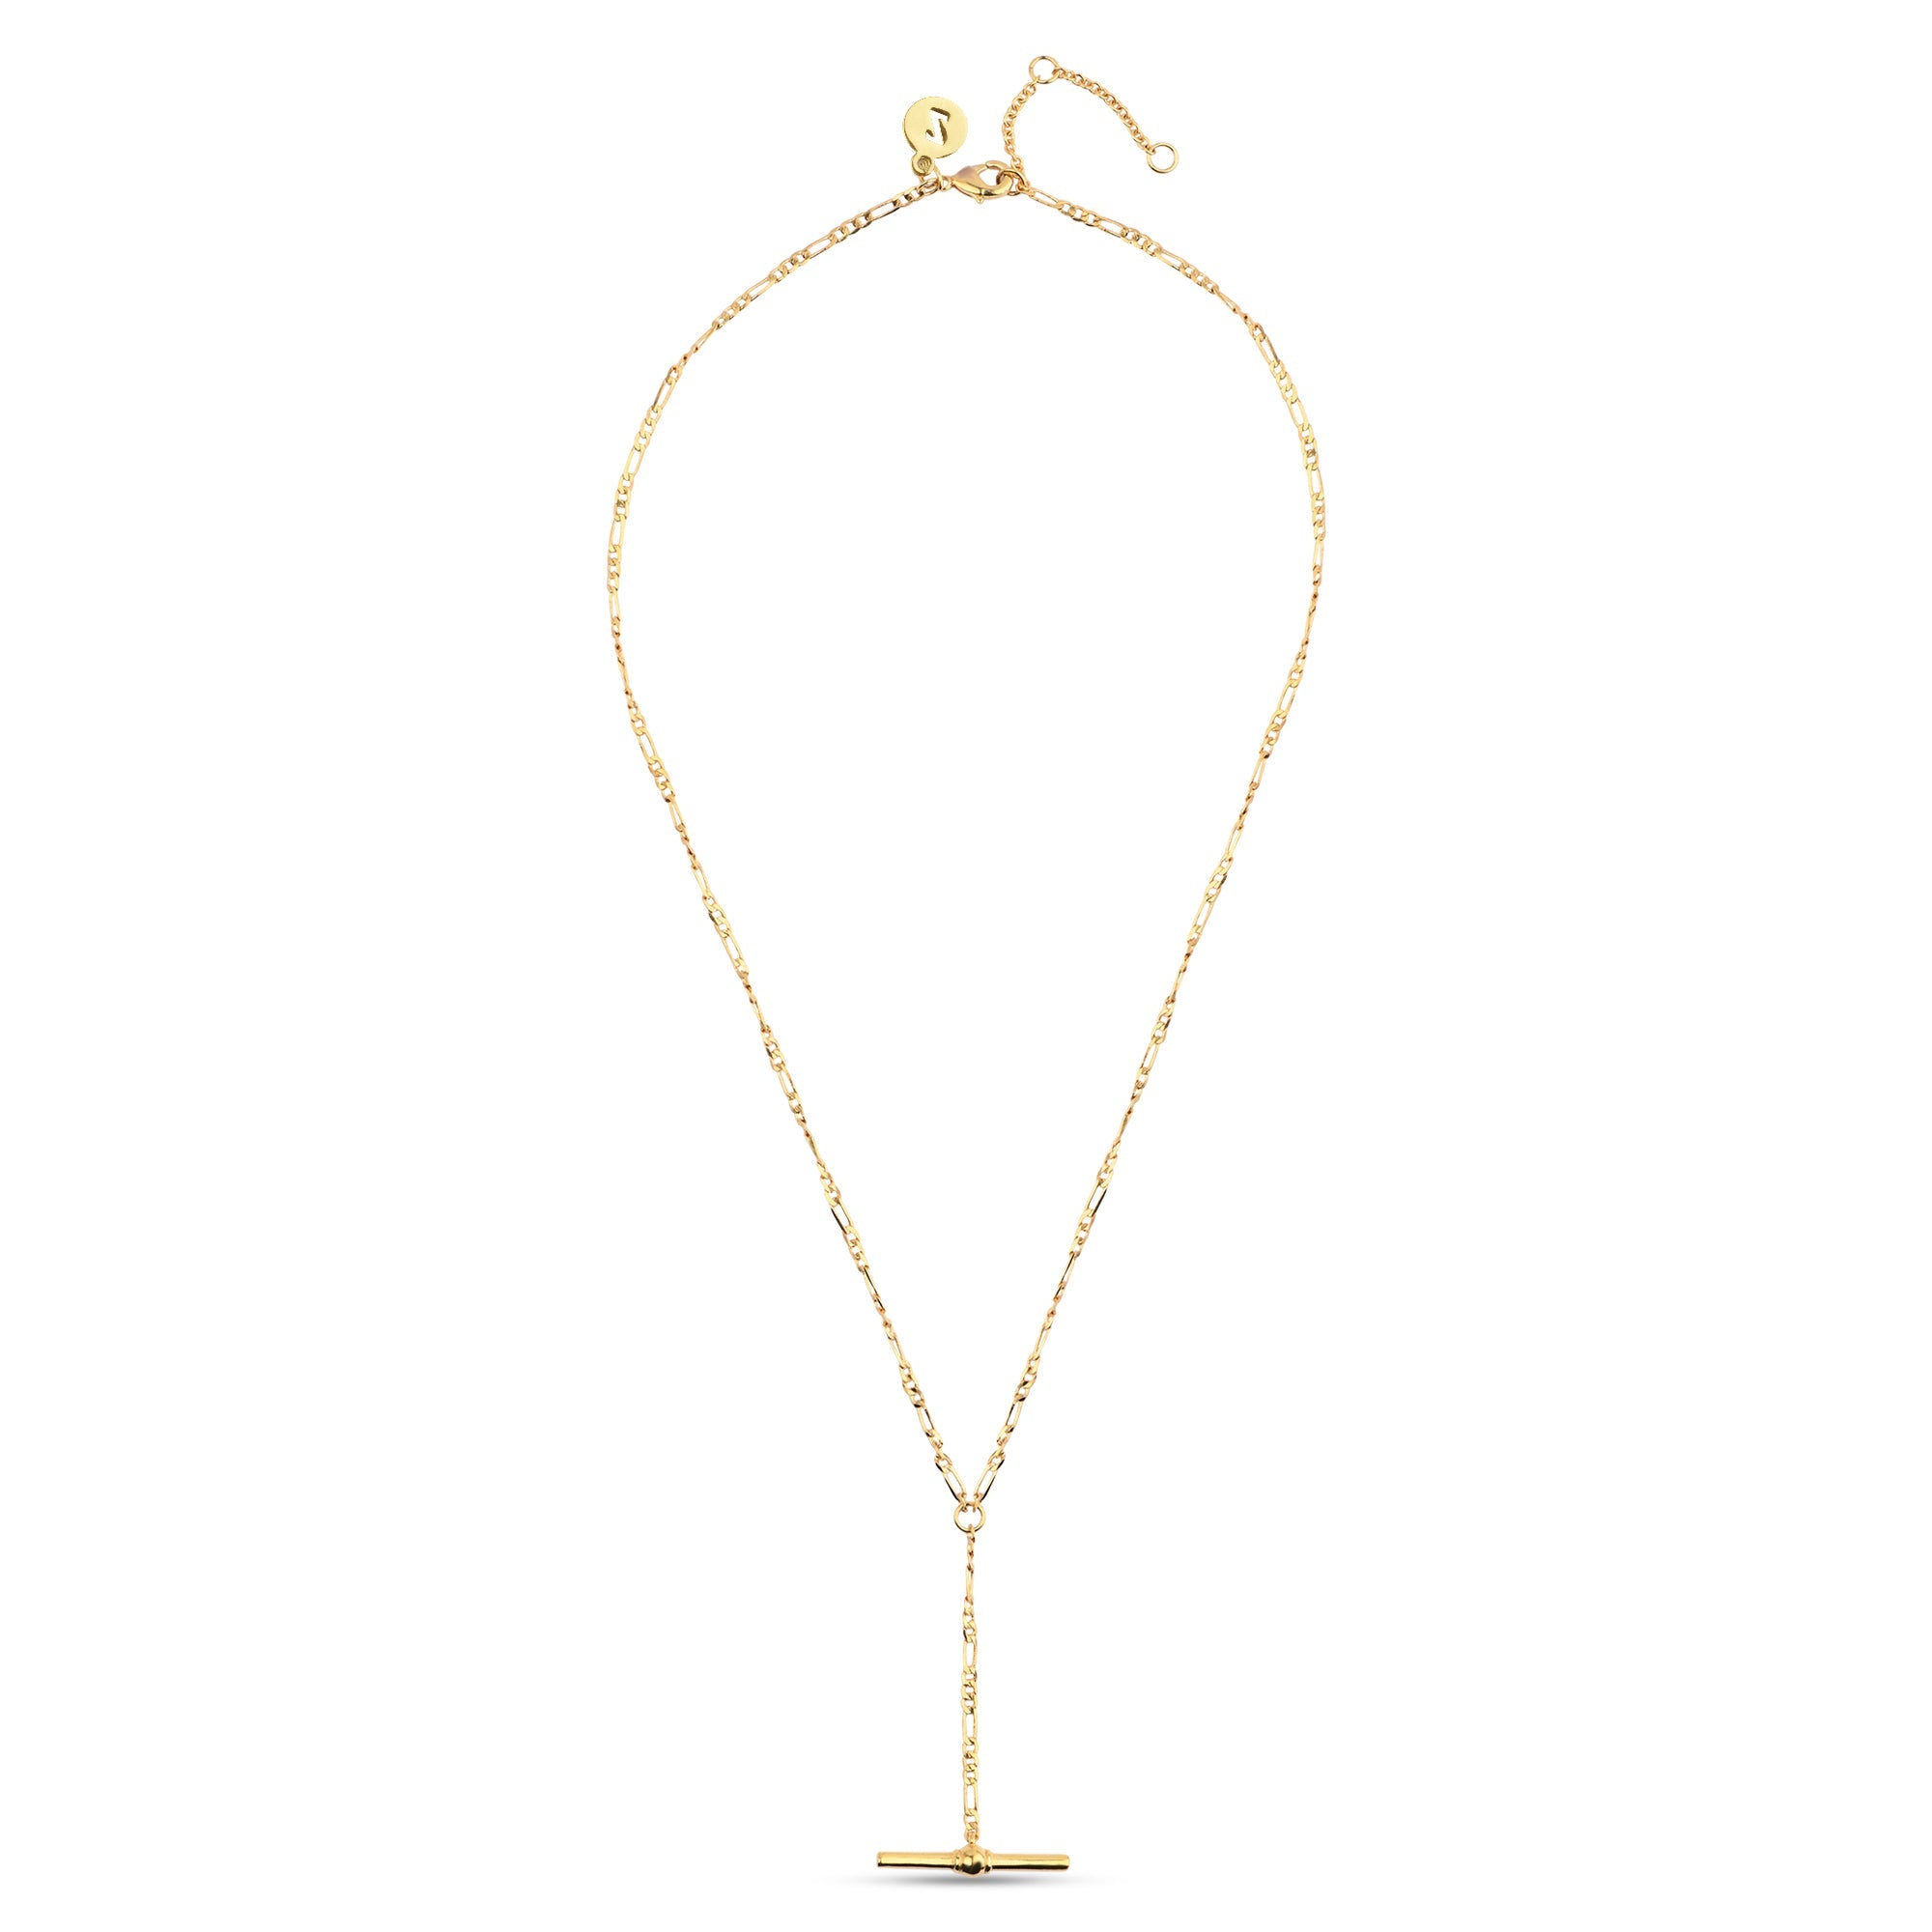 Real Gold Plated Z Heirloom T-bar Chain Necklace For Women By Accessorize London